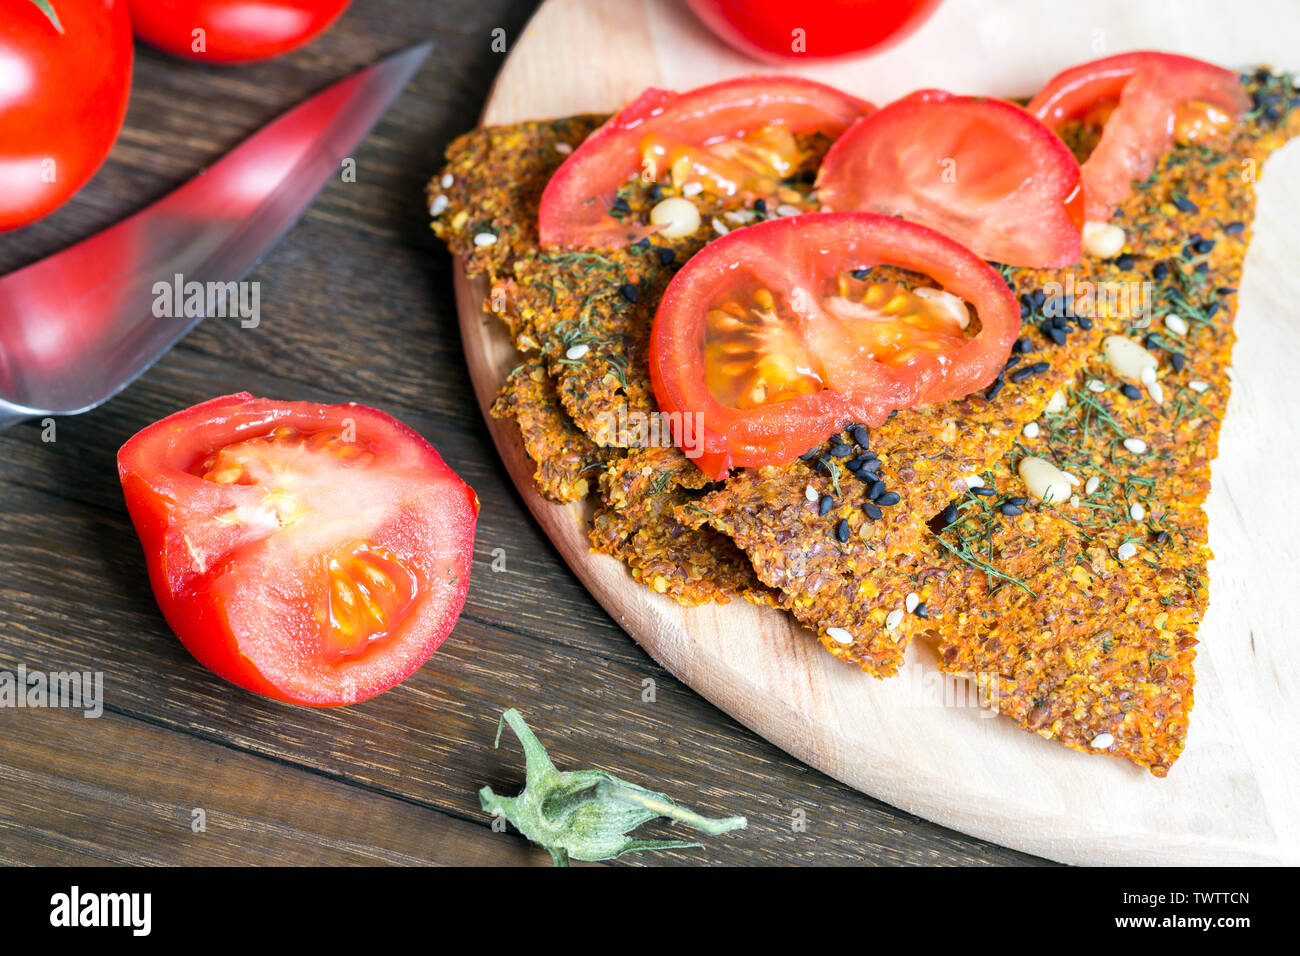 Raw food preparation. Vegan diet. Healthy meal concept. Rustic natural eating. Dried crispbread loaves from carrot, onion and flax, sprinkled with dil Stock Photo